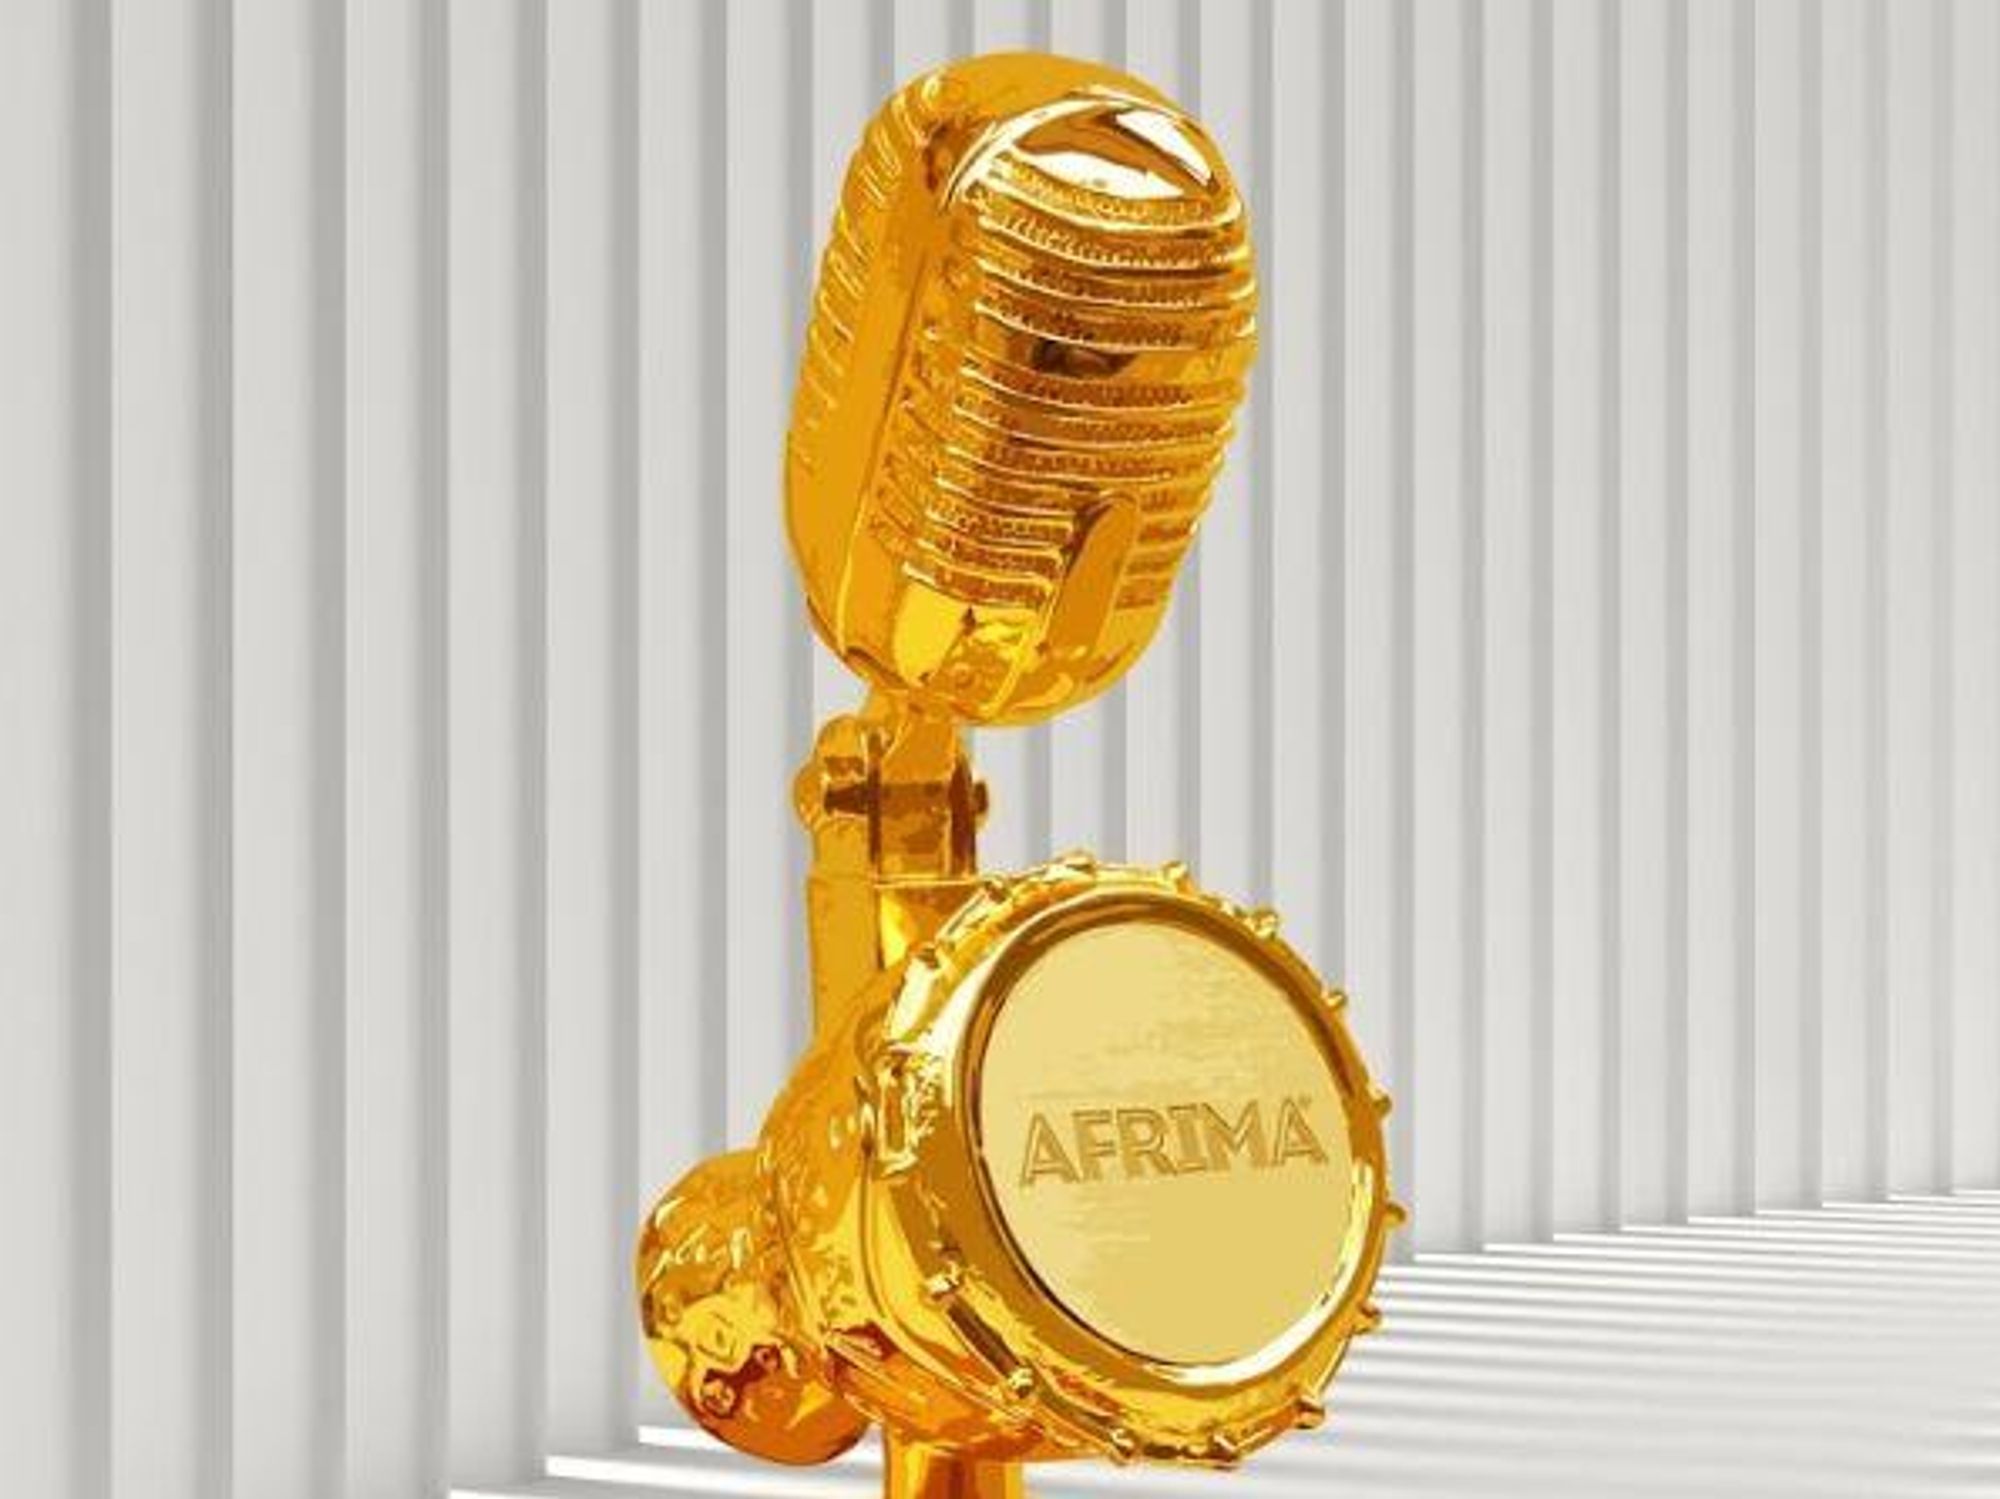 Here Are the Nominees For the 2022 AFRIMA Awards